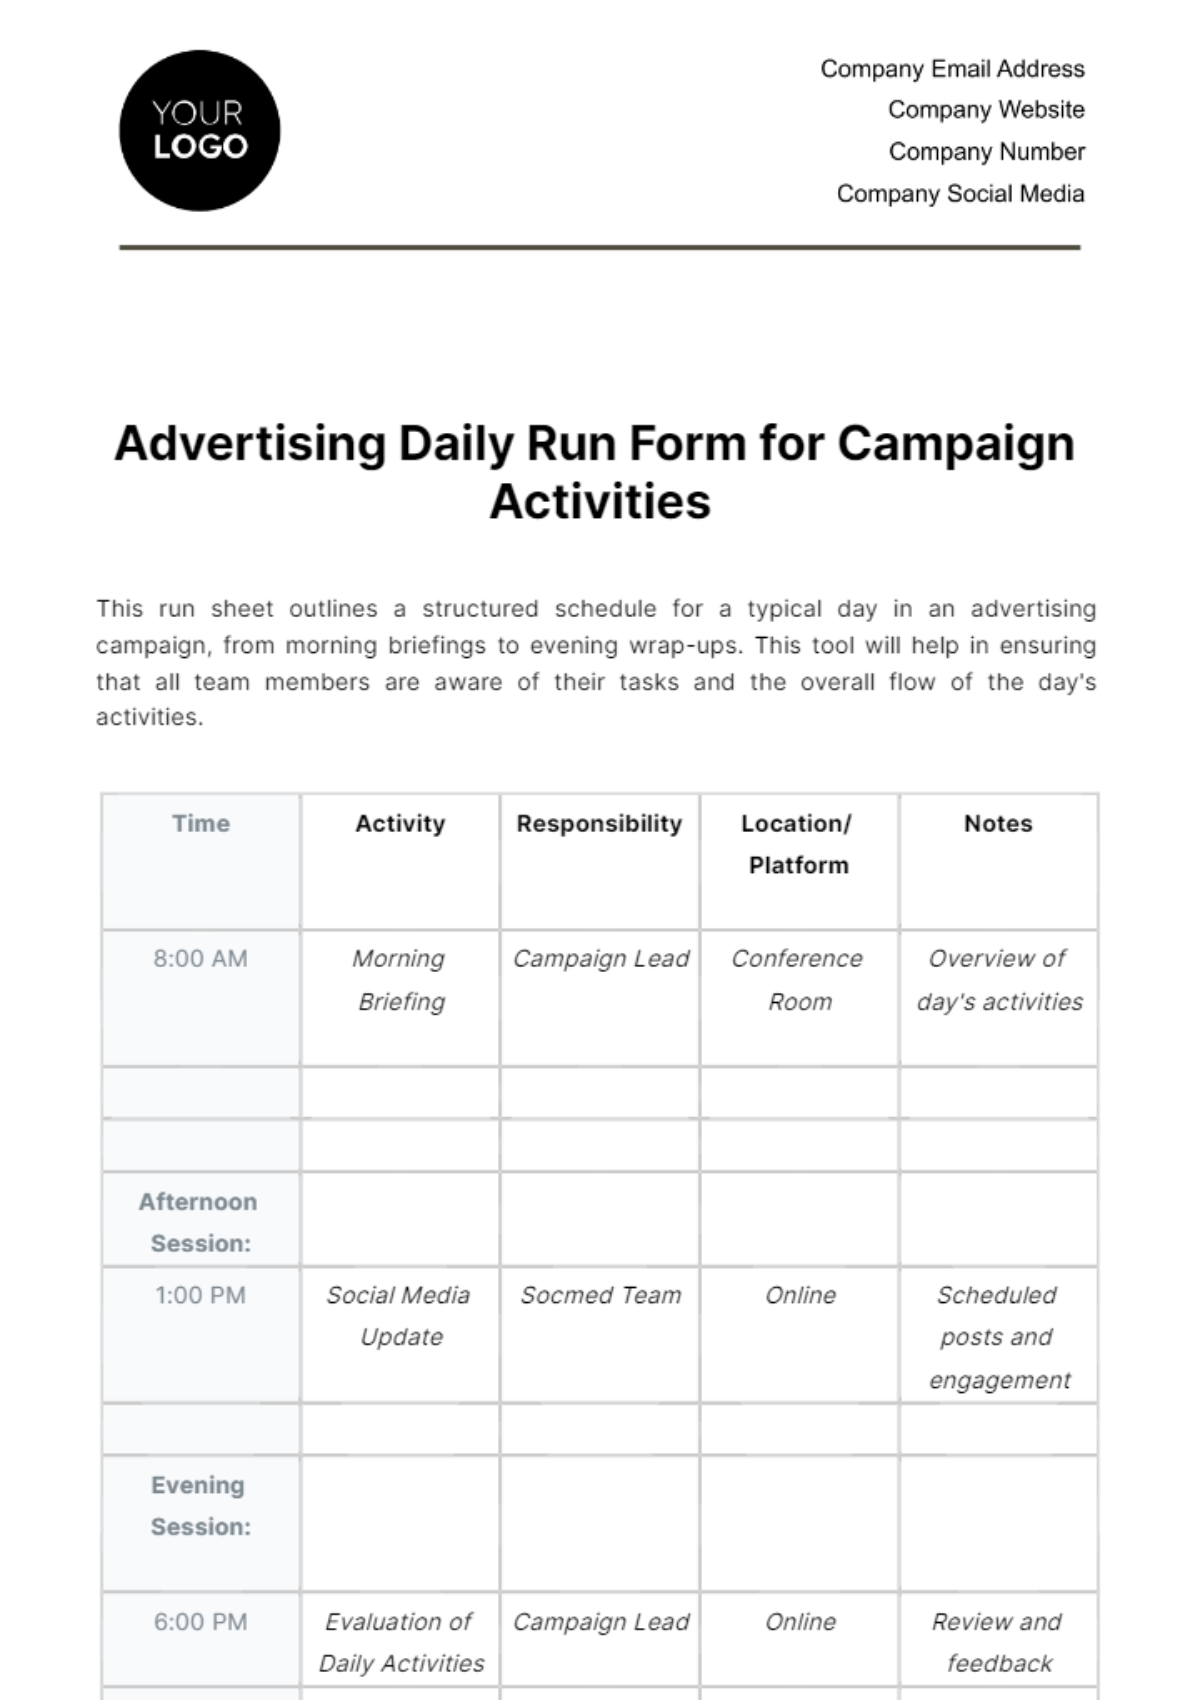 Advertising Daily Run Form for Campaign Activities Template